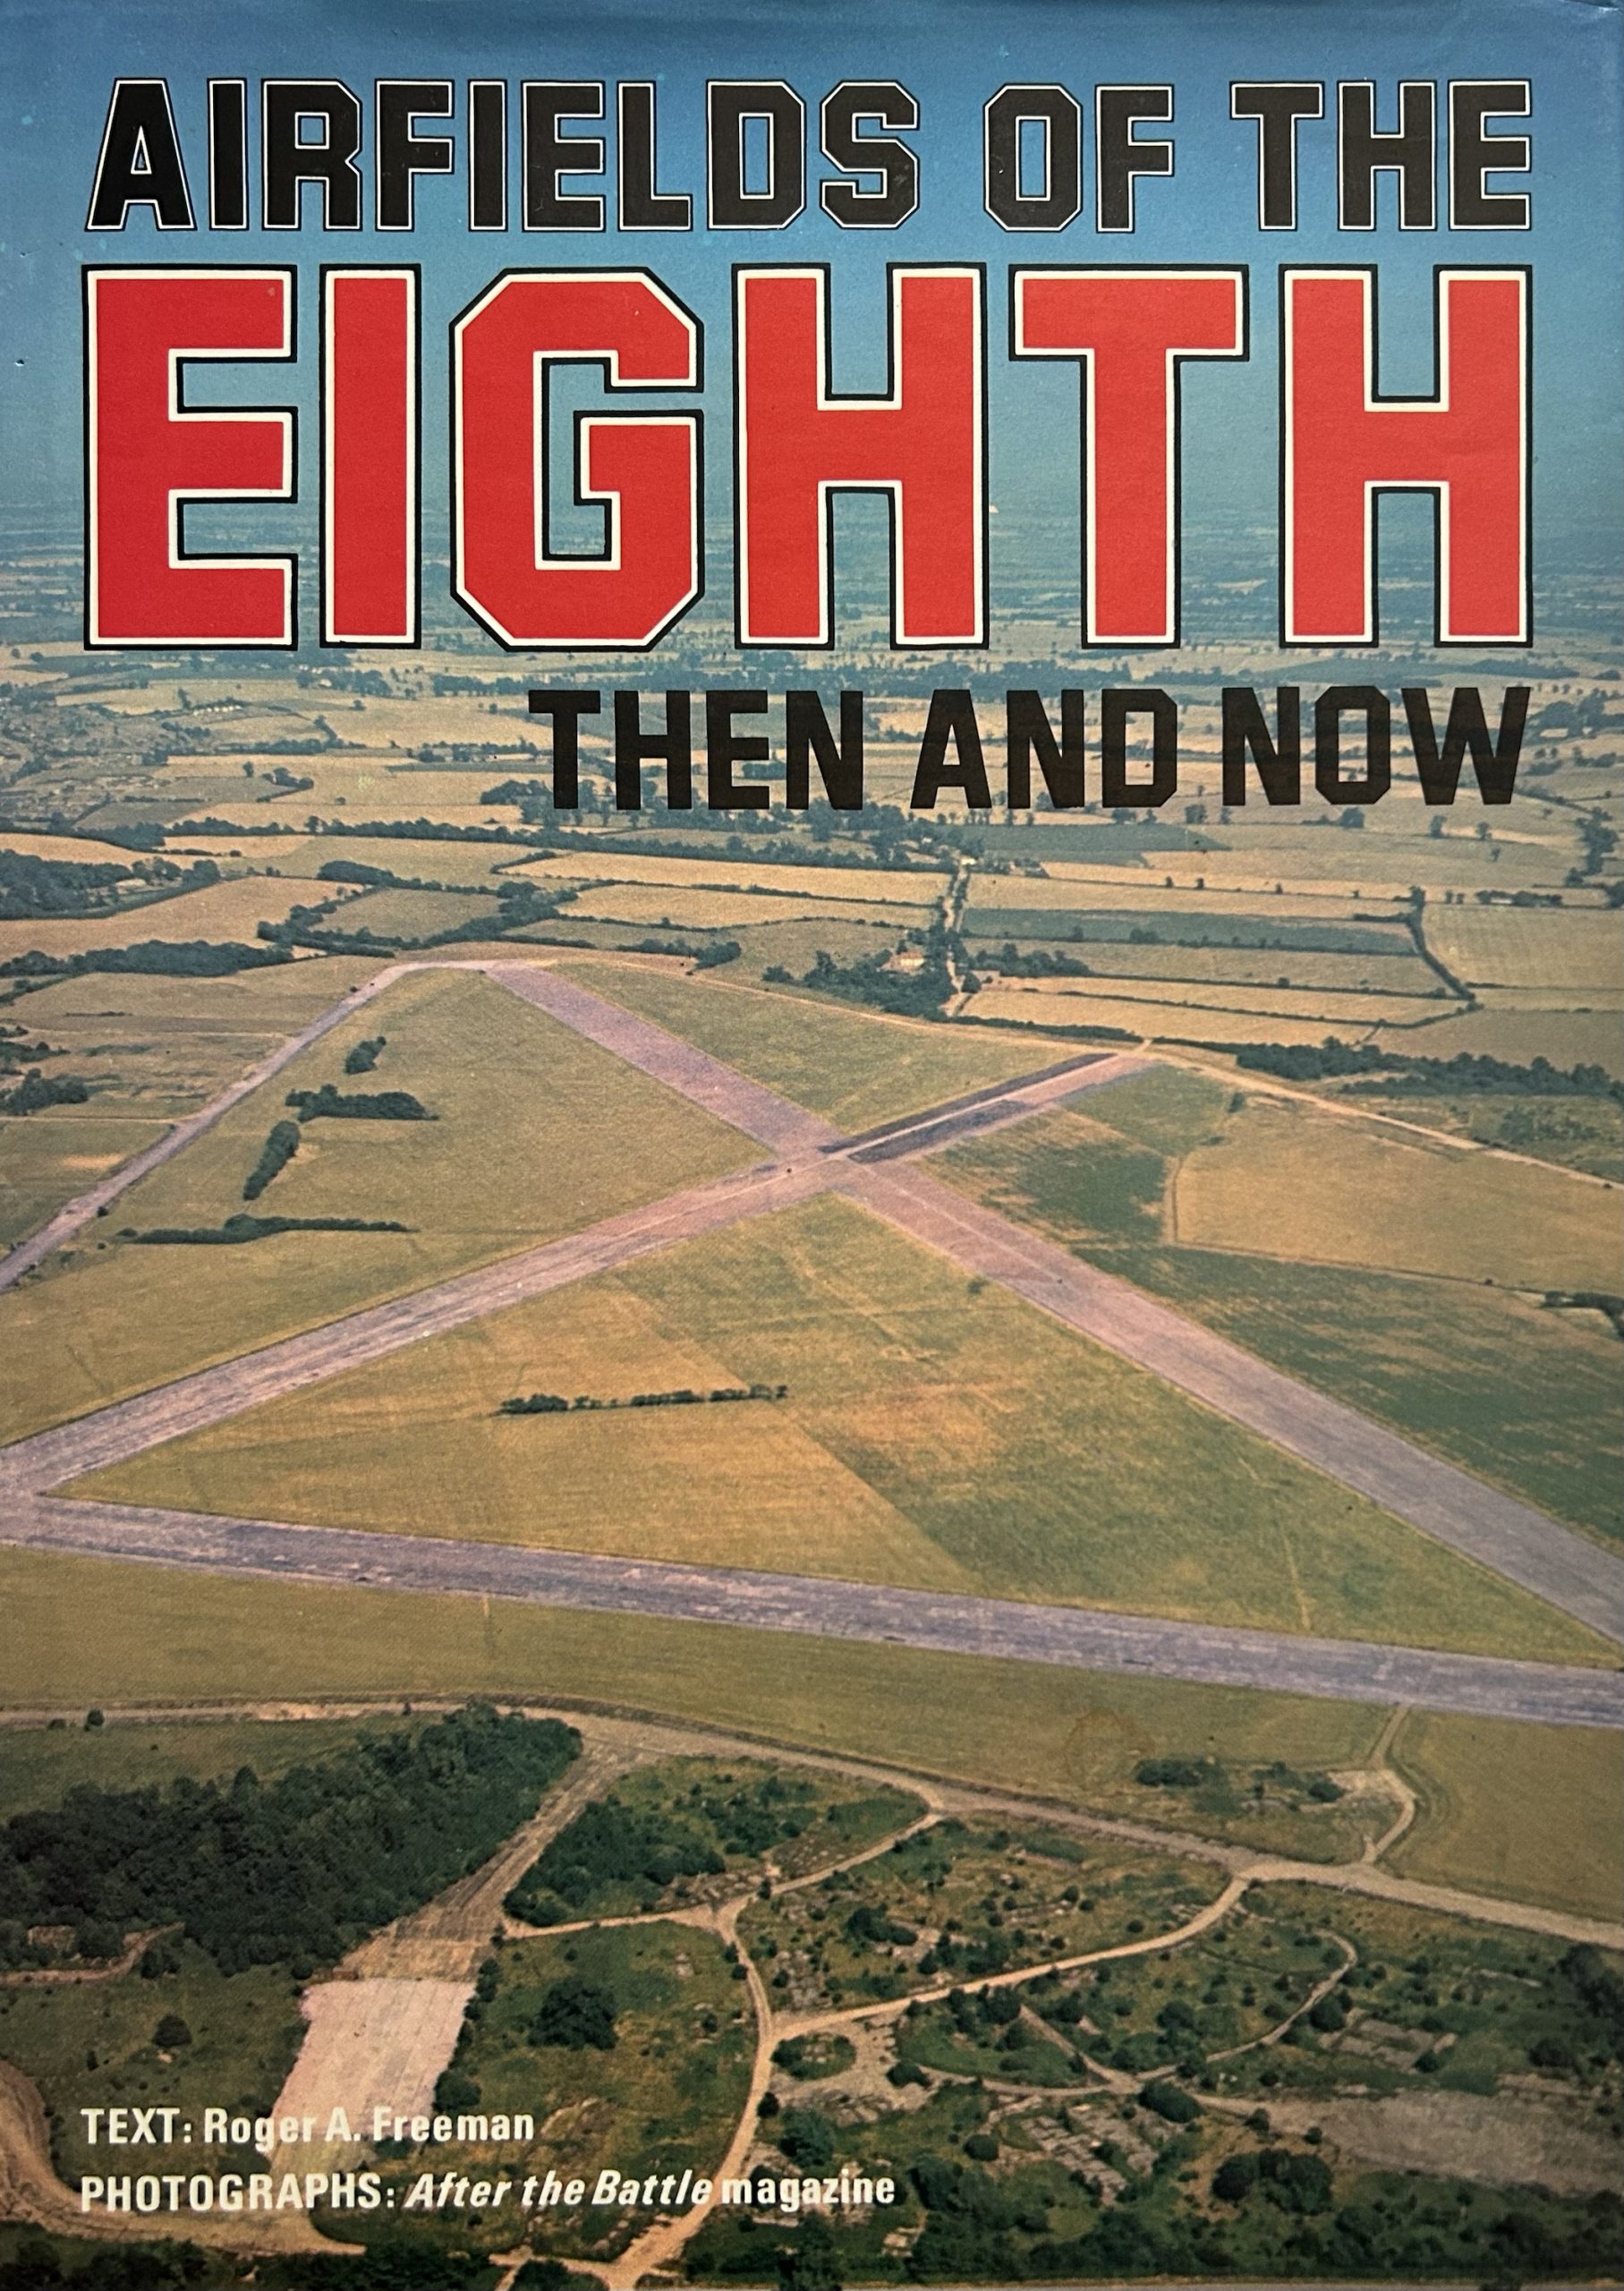 Airfields of the Eighth Then and Now by Roger A. Freeman